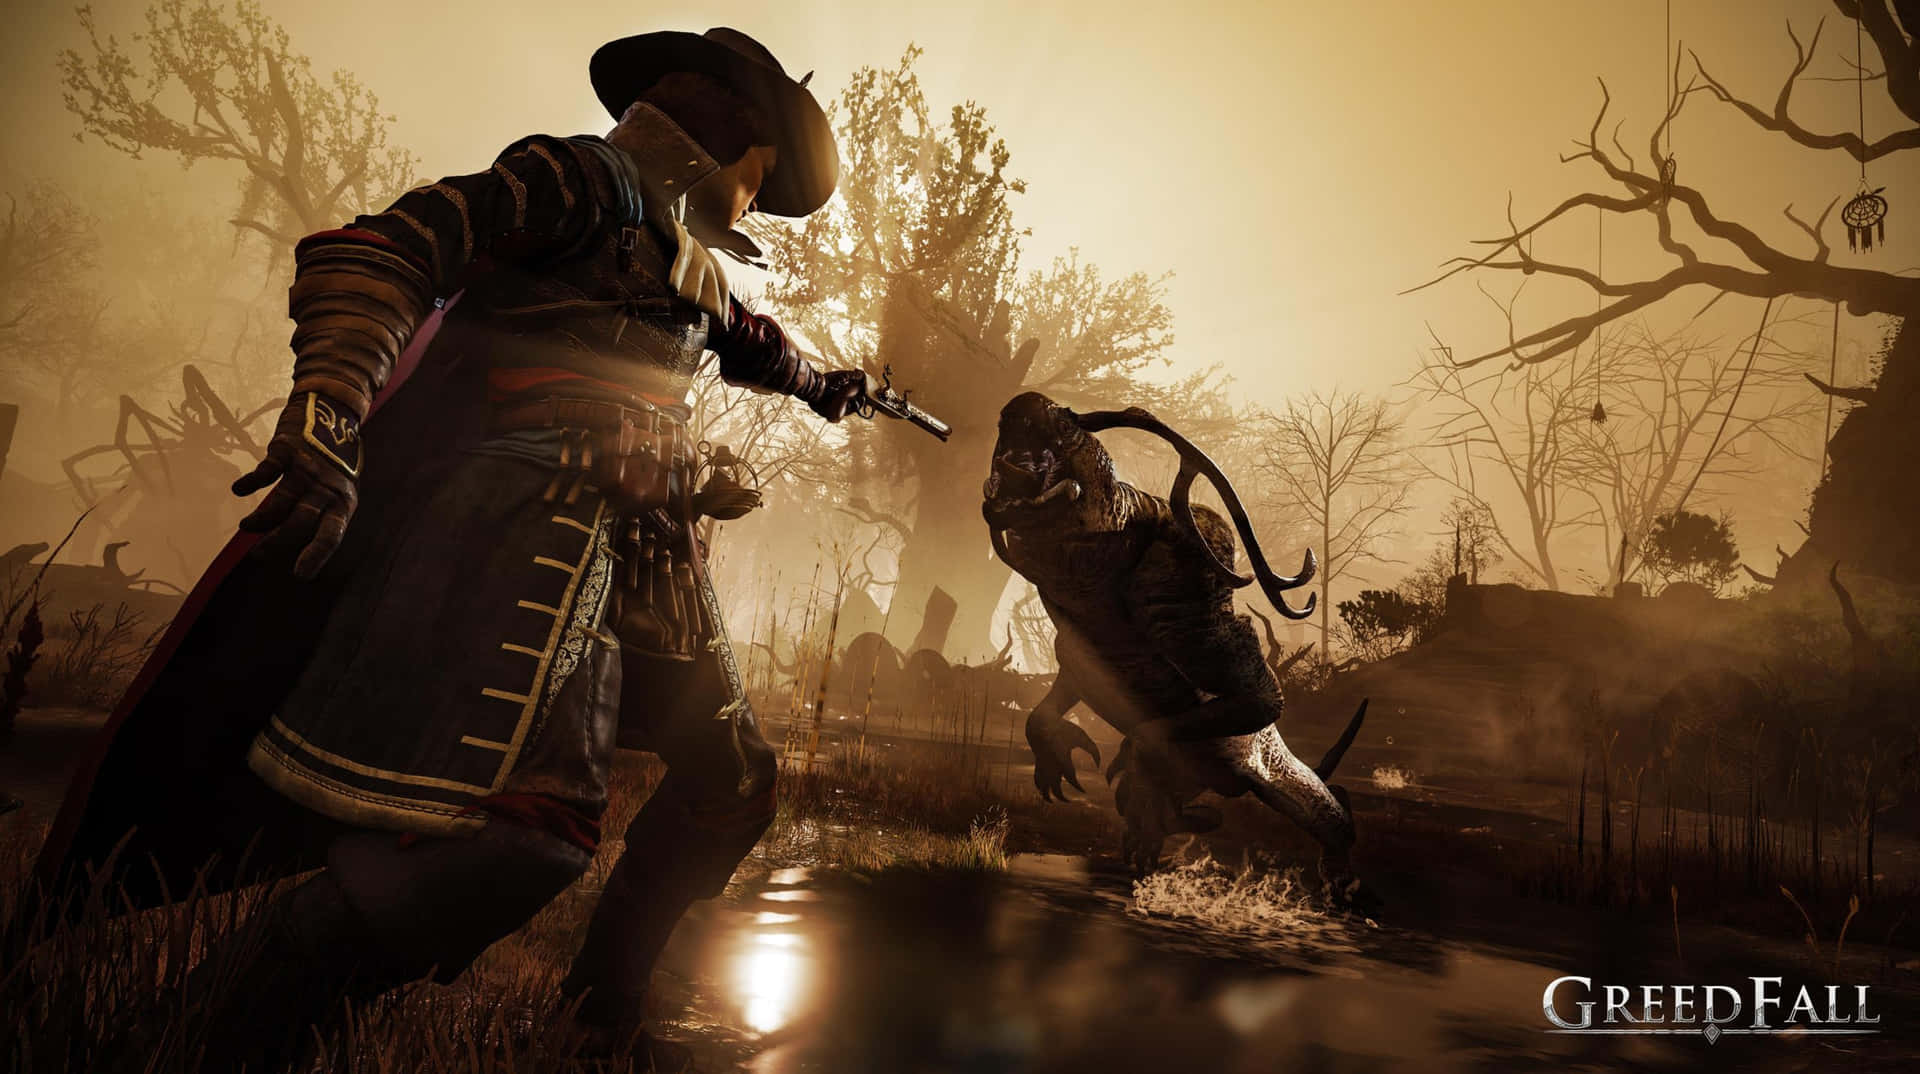 Hd Greedfall Background Pirate Fighting Swamp Monster Wallpaper